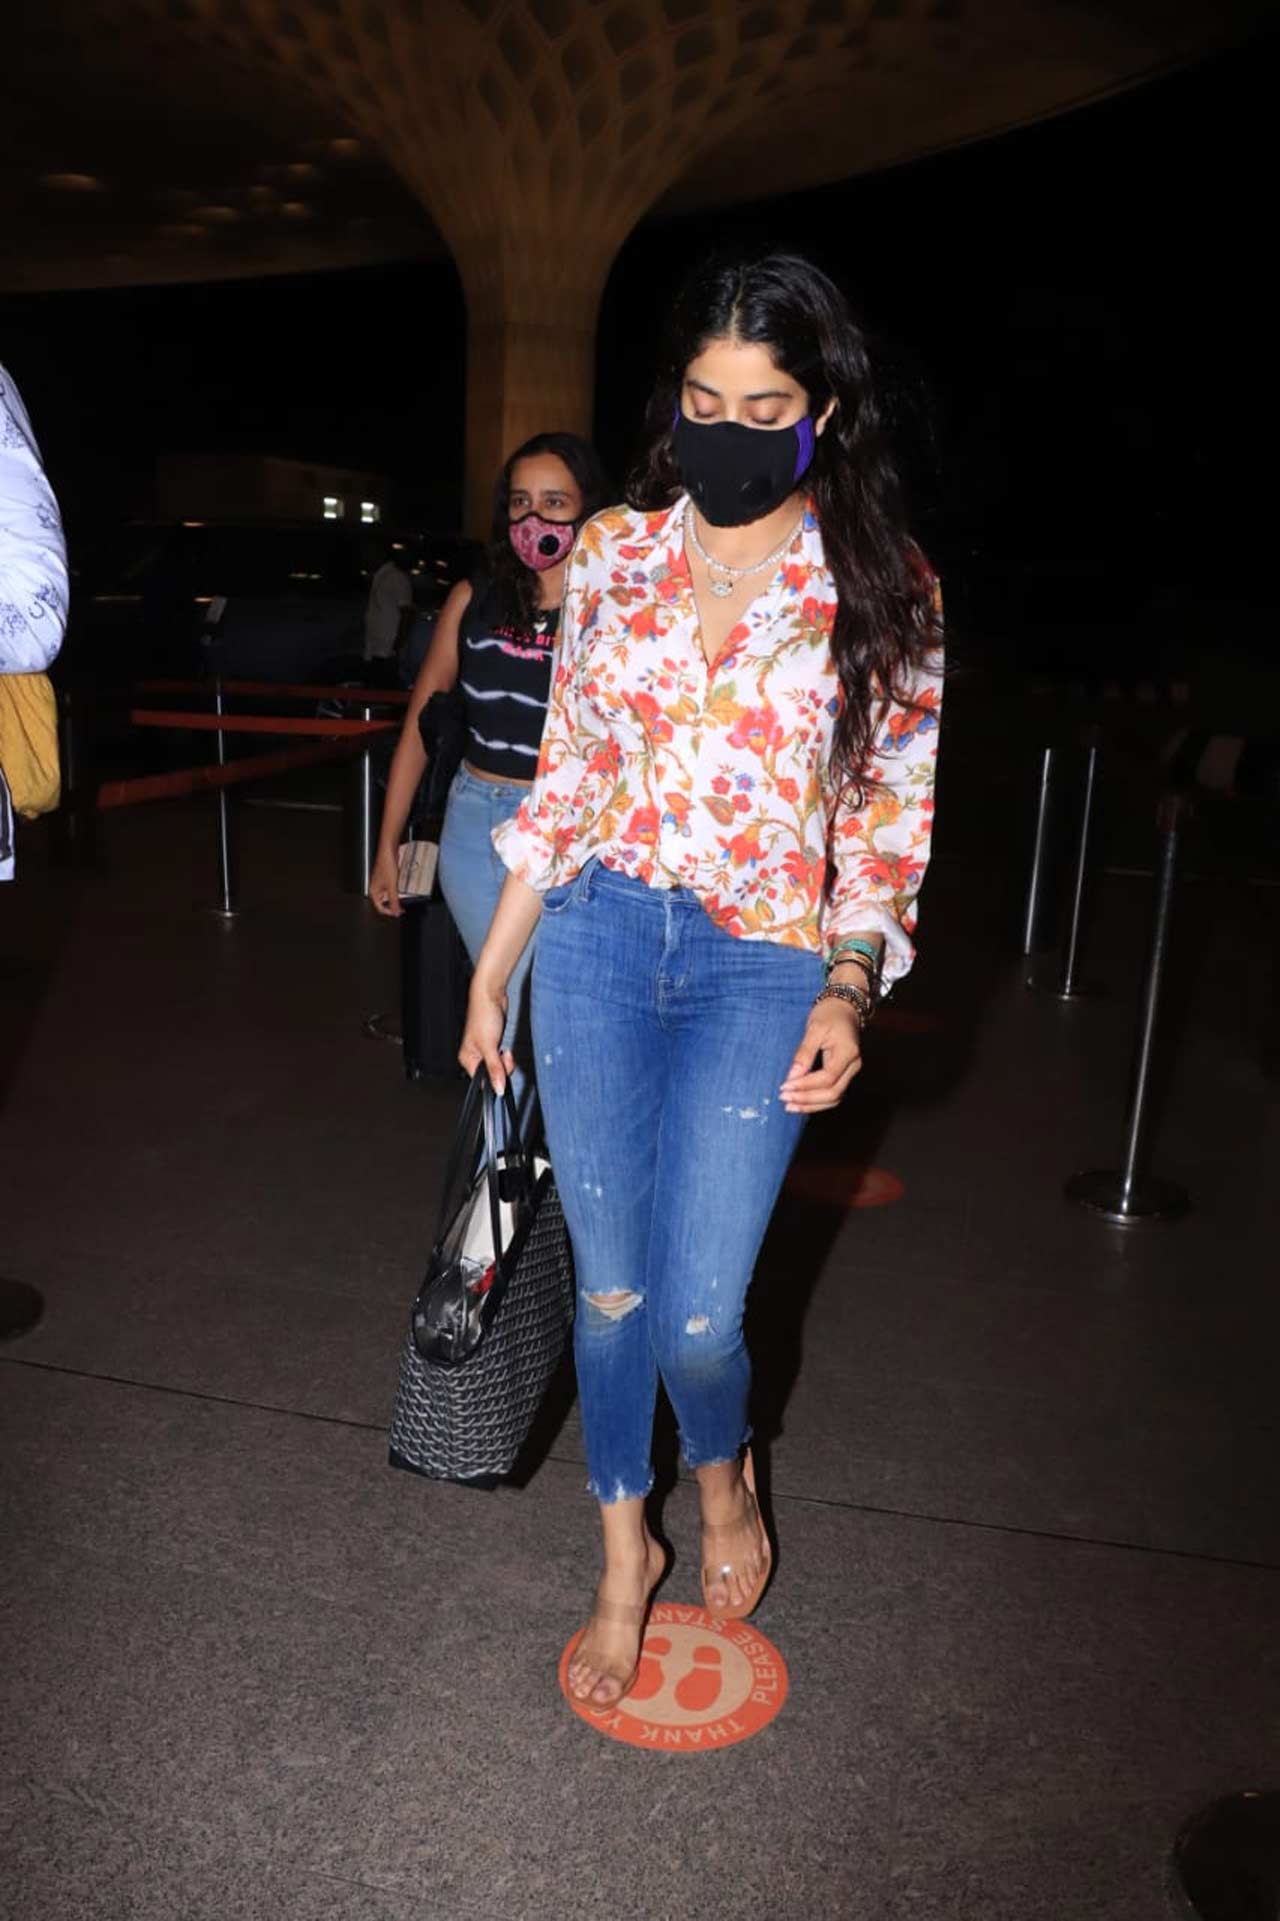 Janhvi Kapoor, whose last theatre release Roohi was released on a popular OTT platform, was also clicked at the Mumbai airport. Her floral top and basic denim was a true winner of casual airport look.